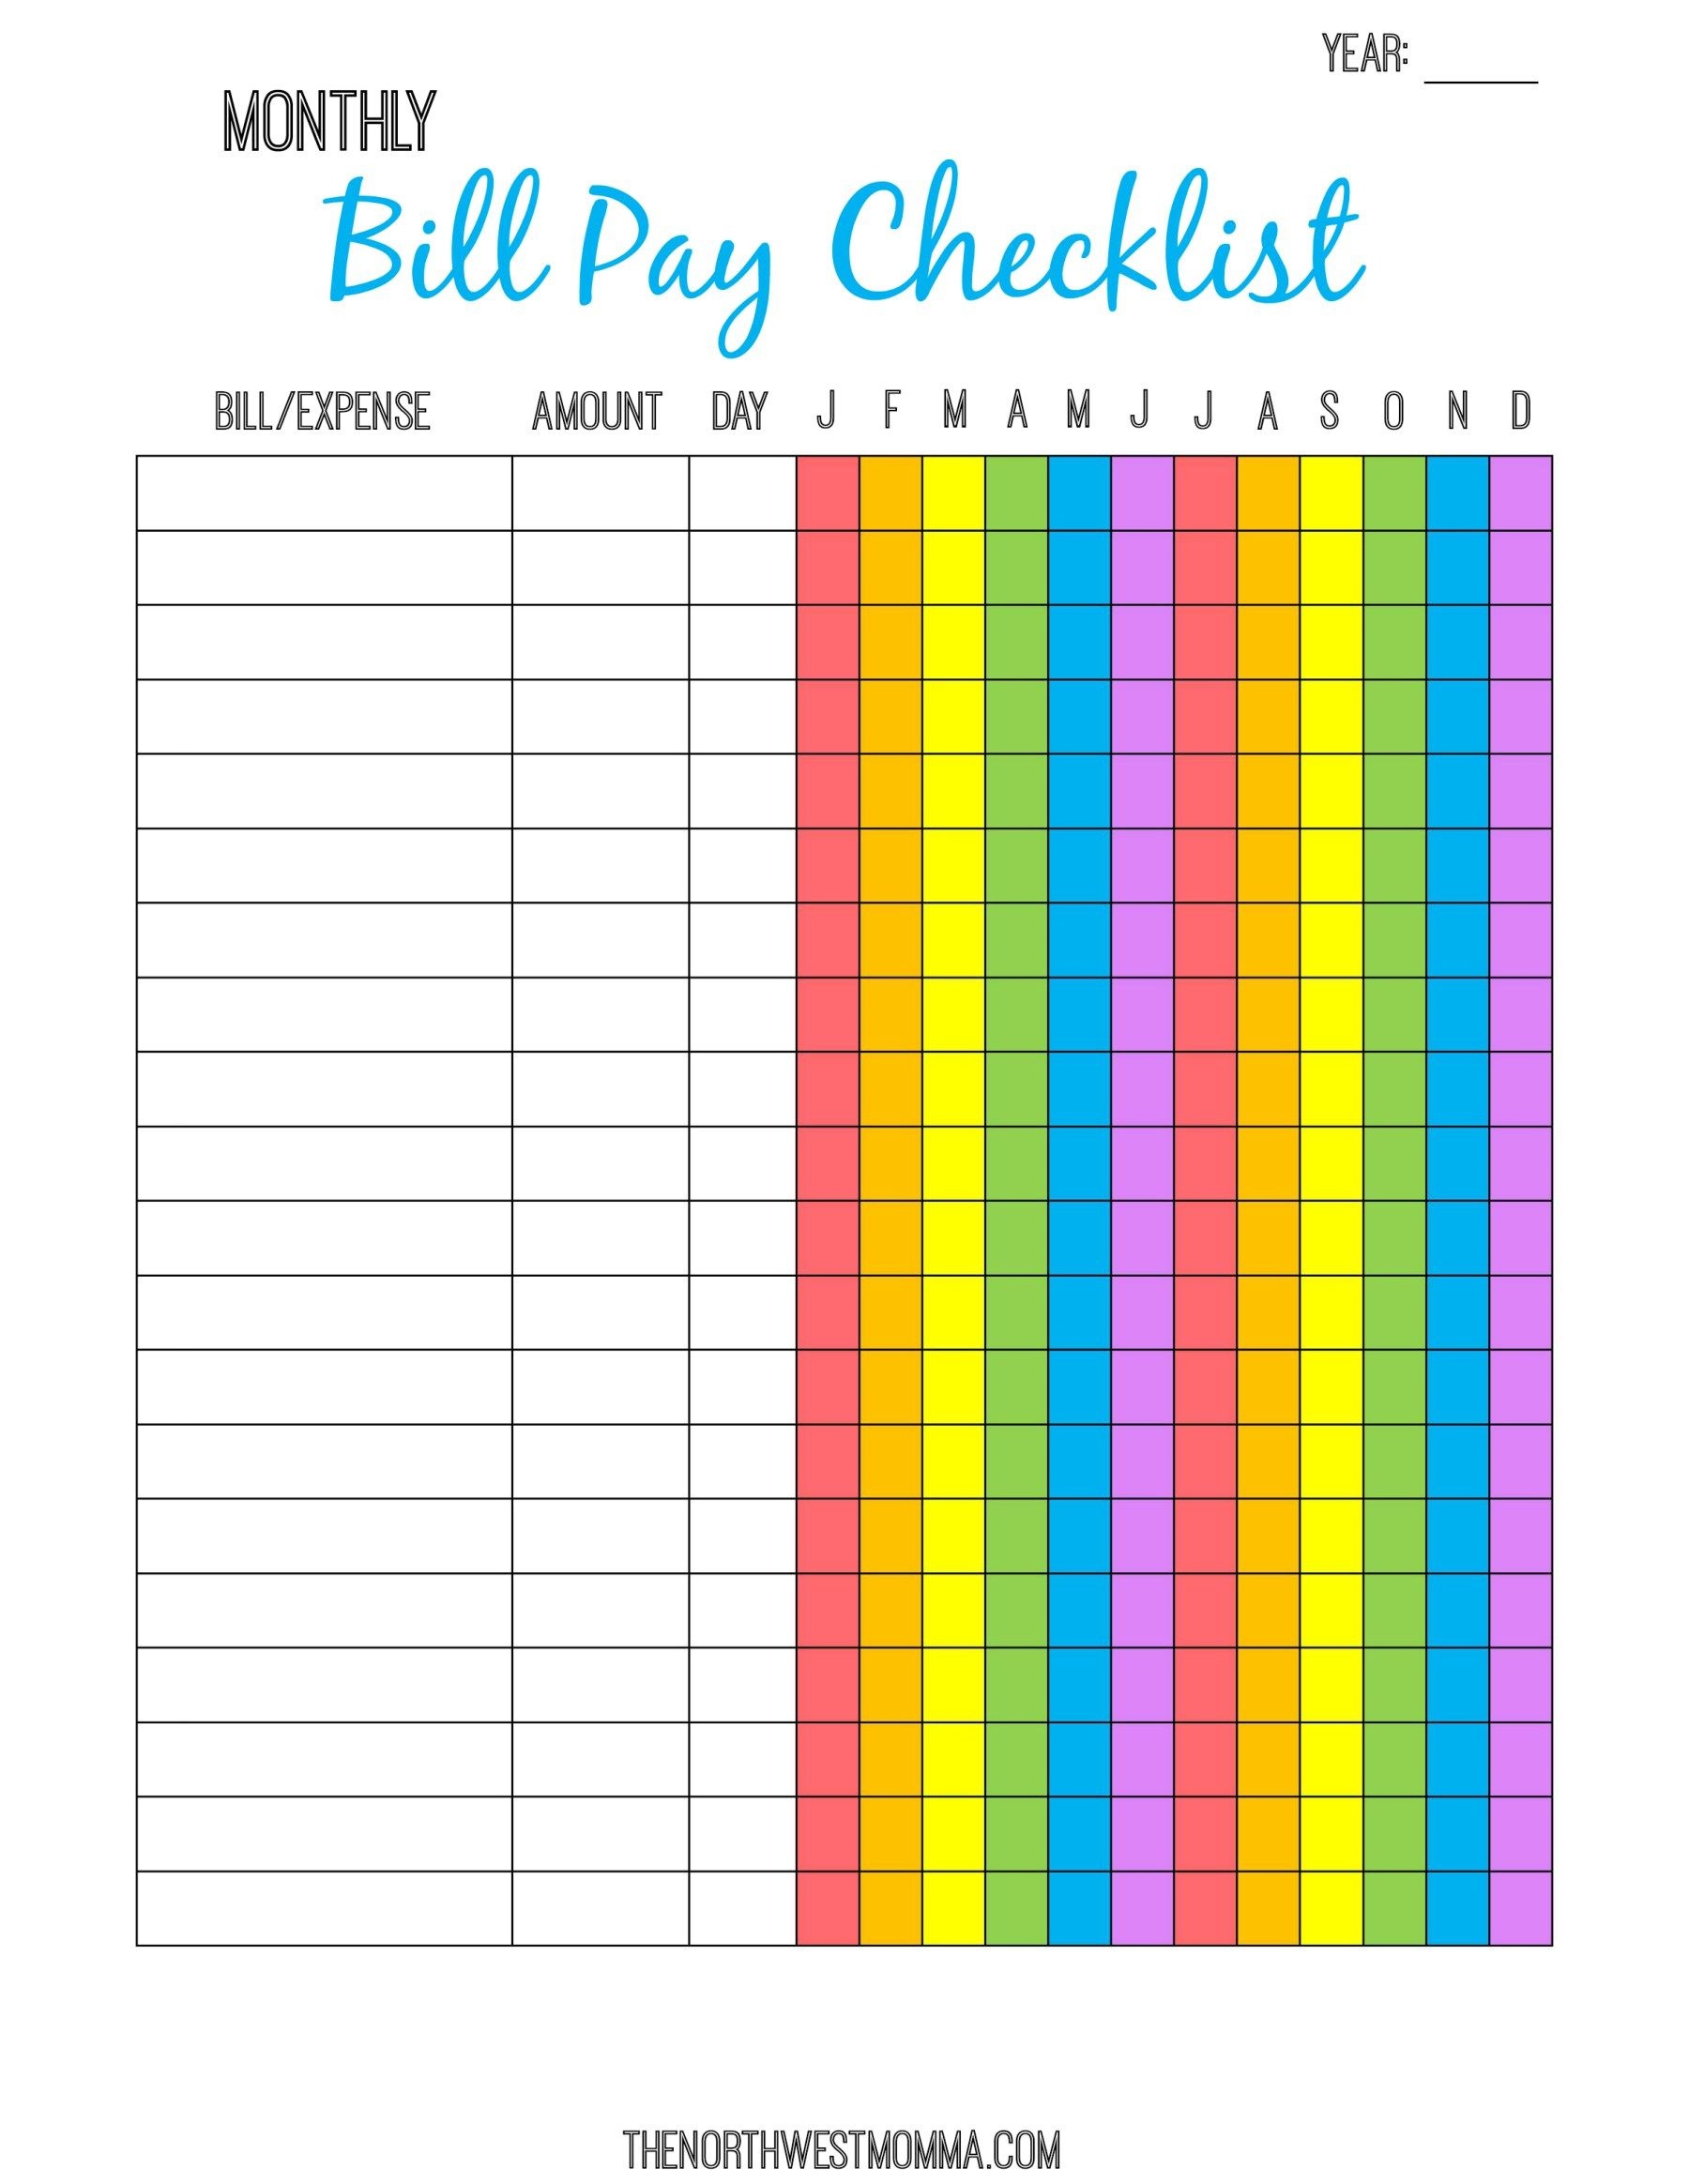 Monthly Bill Pay Checklist- Free Printable! | $ Saving Money - Free Printable Bill Checklist